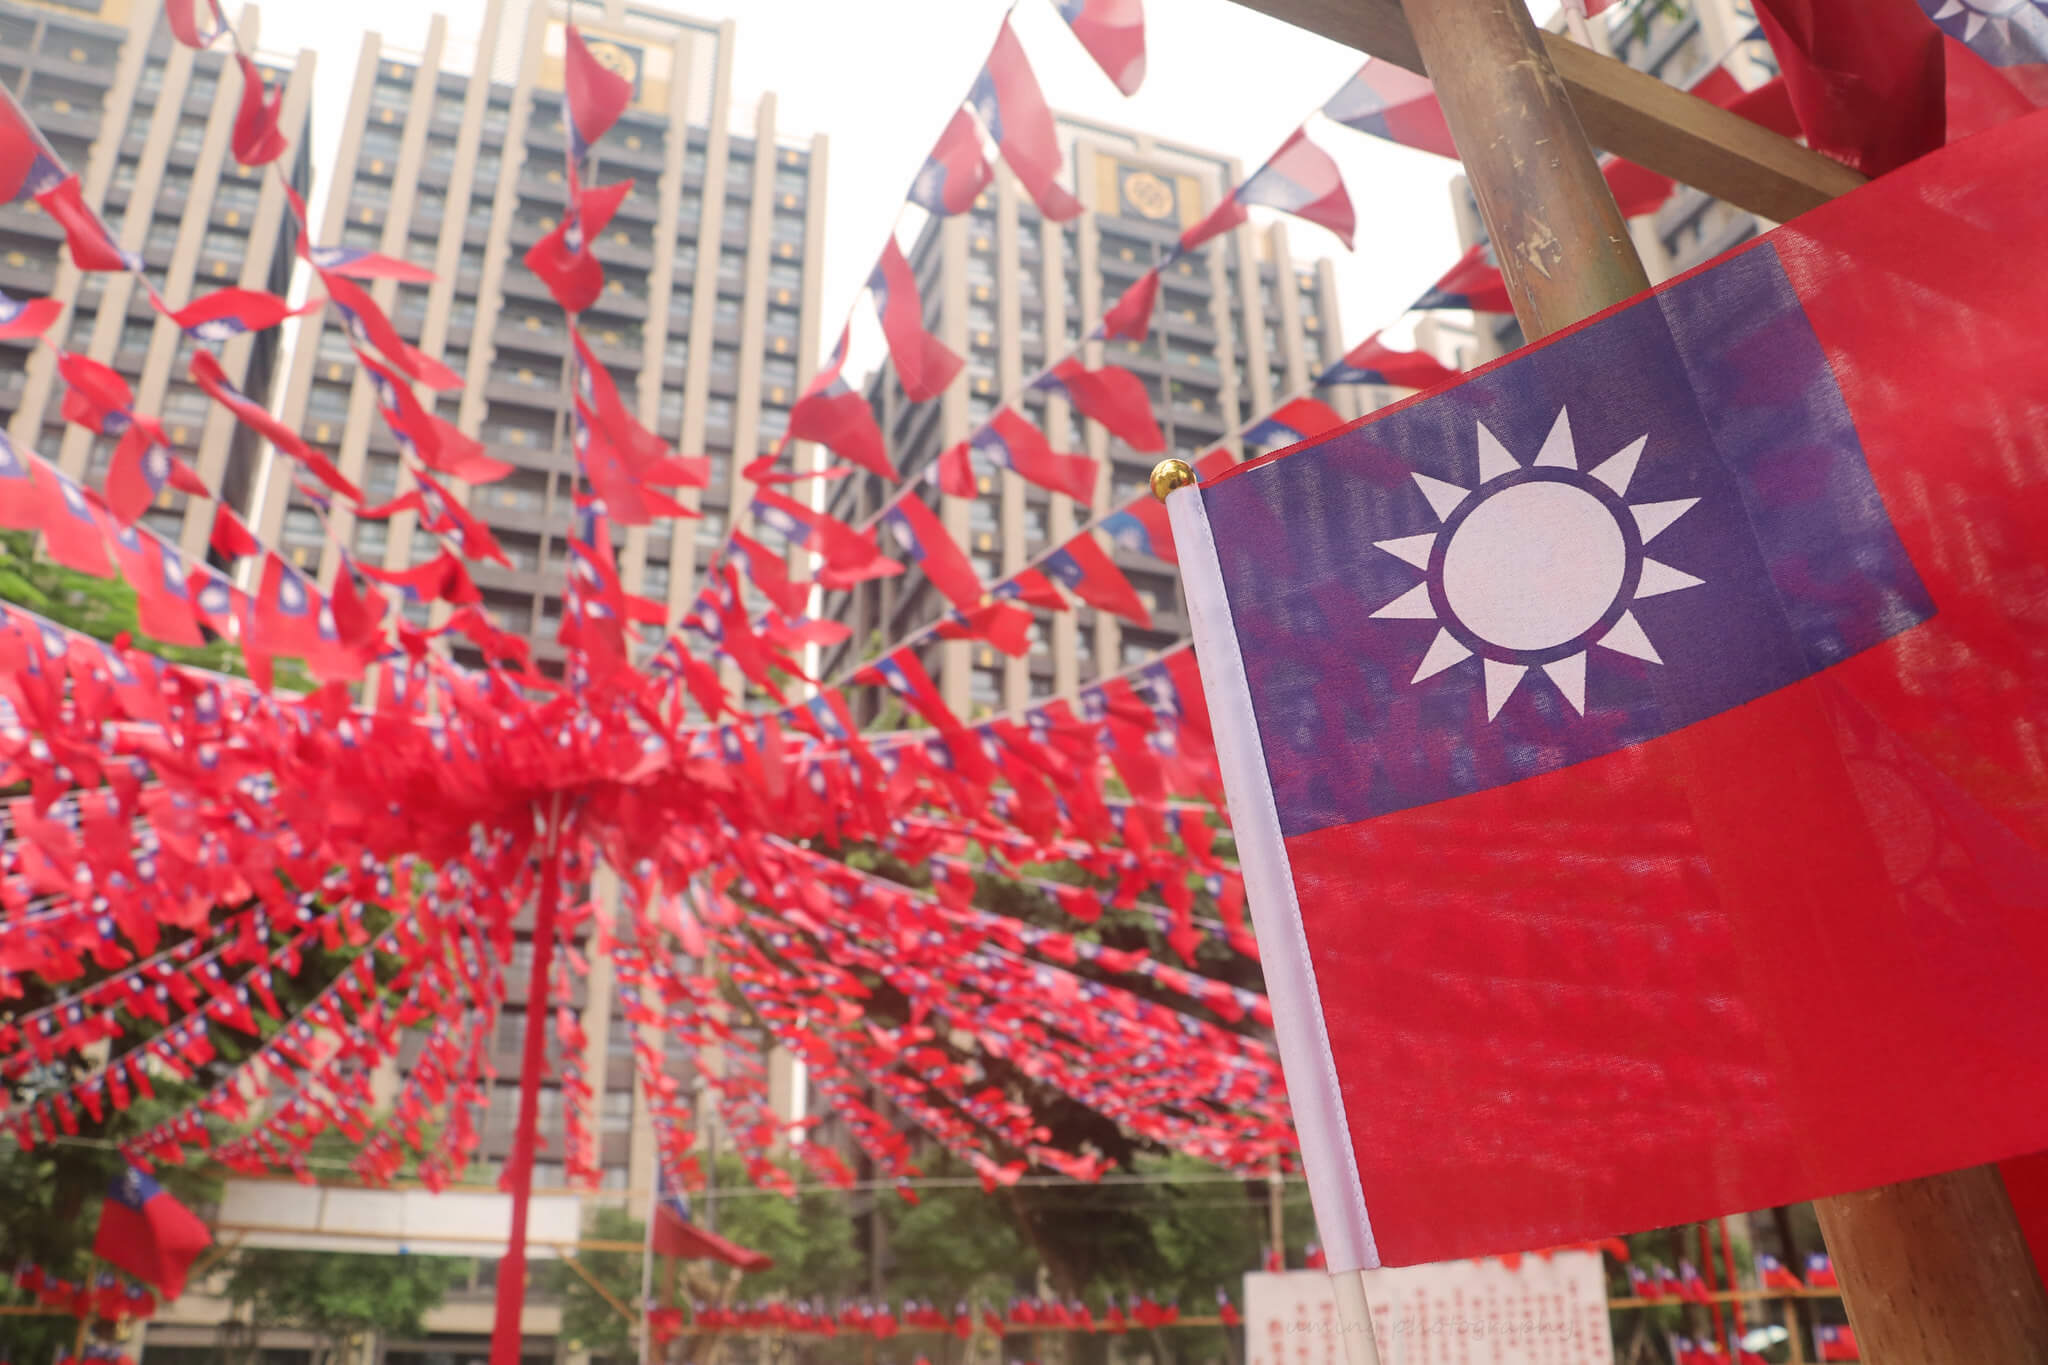 Holmes - The flag of the Republic of China, commonly referred to as the Flag of Taiwan. Uming Photography - Flickr